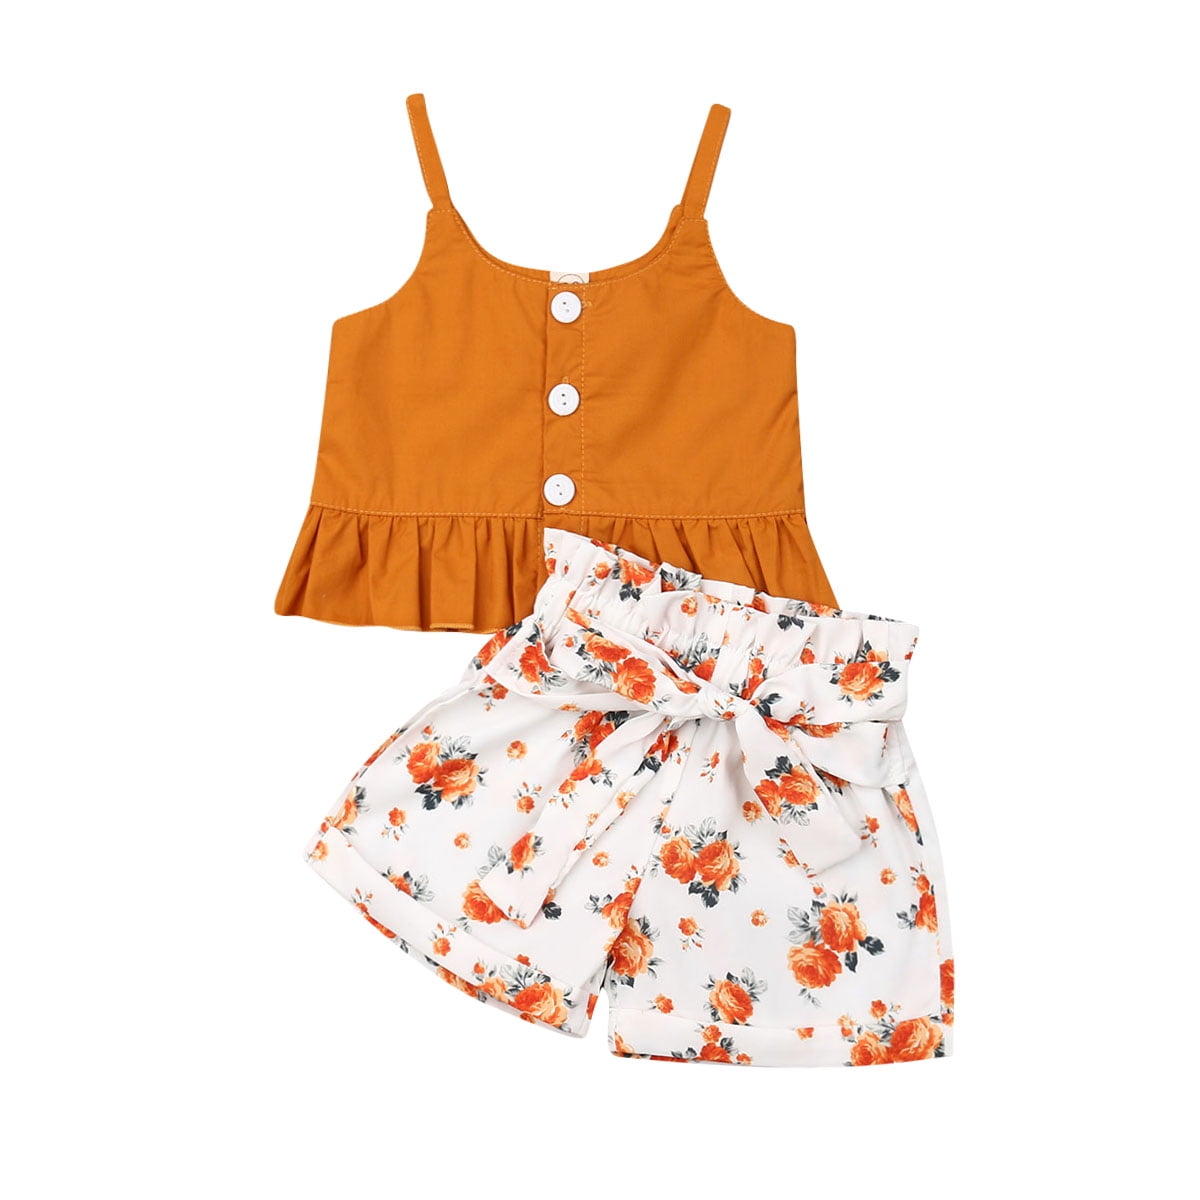 Bowknot Flower Pants 2Pcs Outfits Toddler Baby Girls Summer Floral Shorts Set Sleeveless Crop Tops 